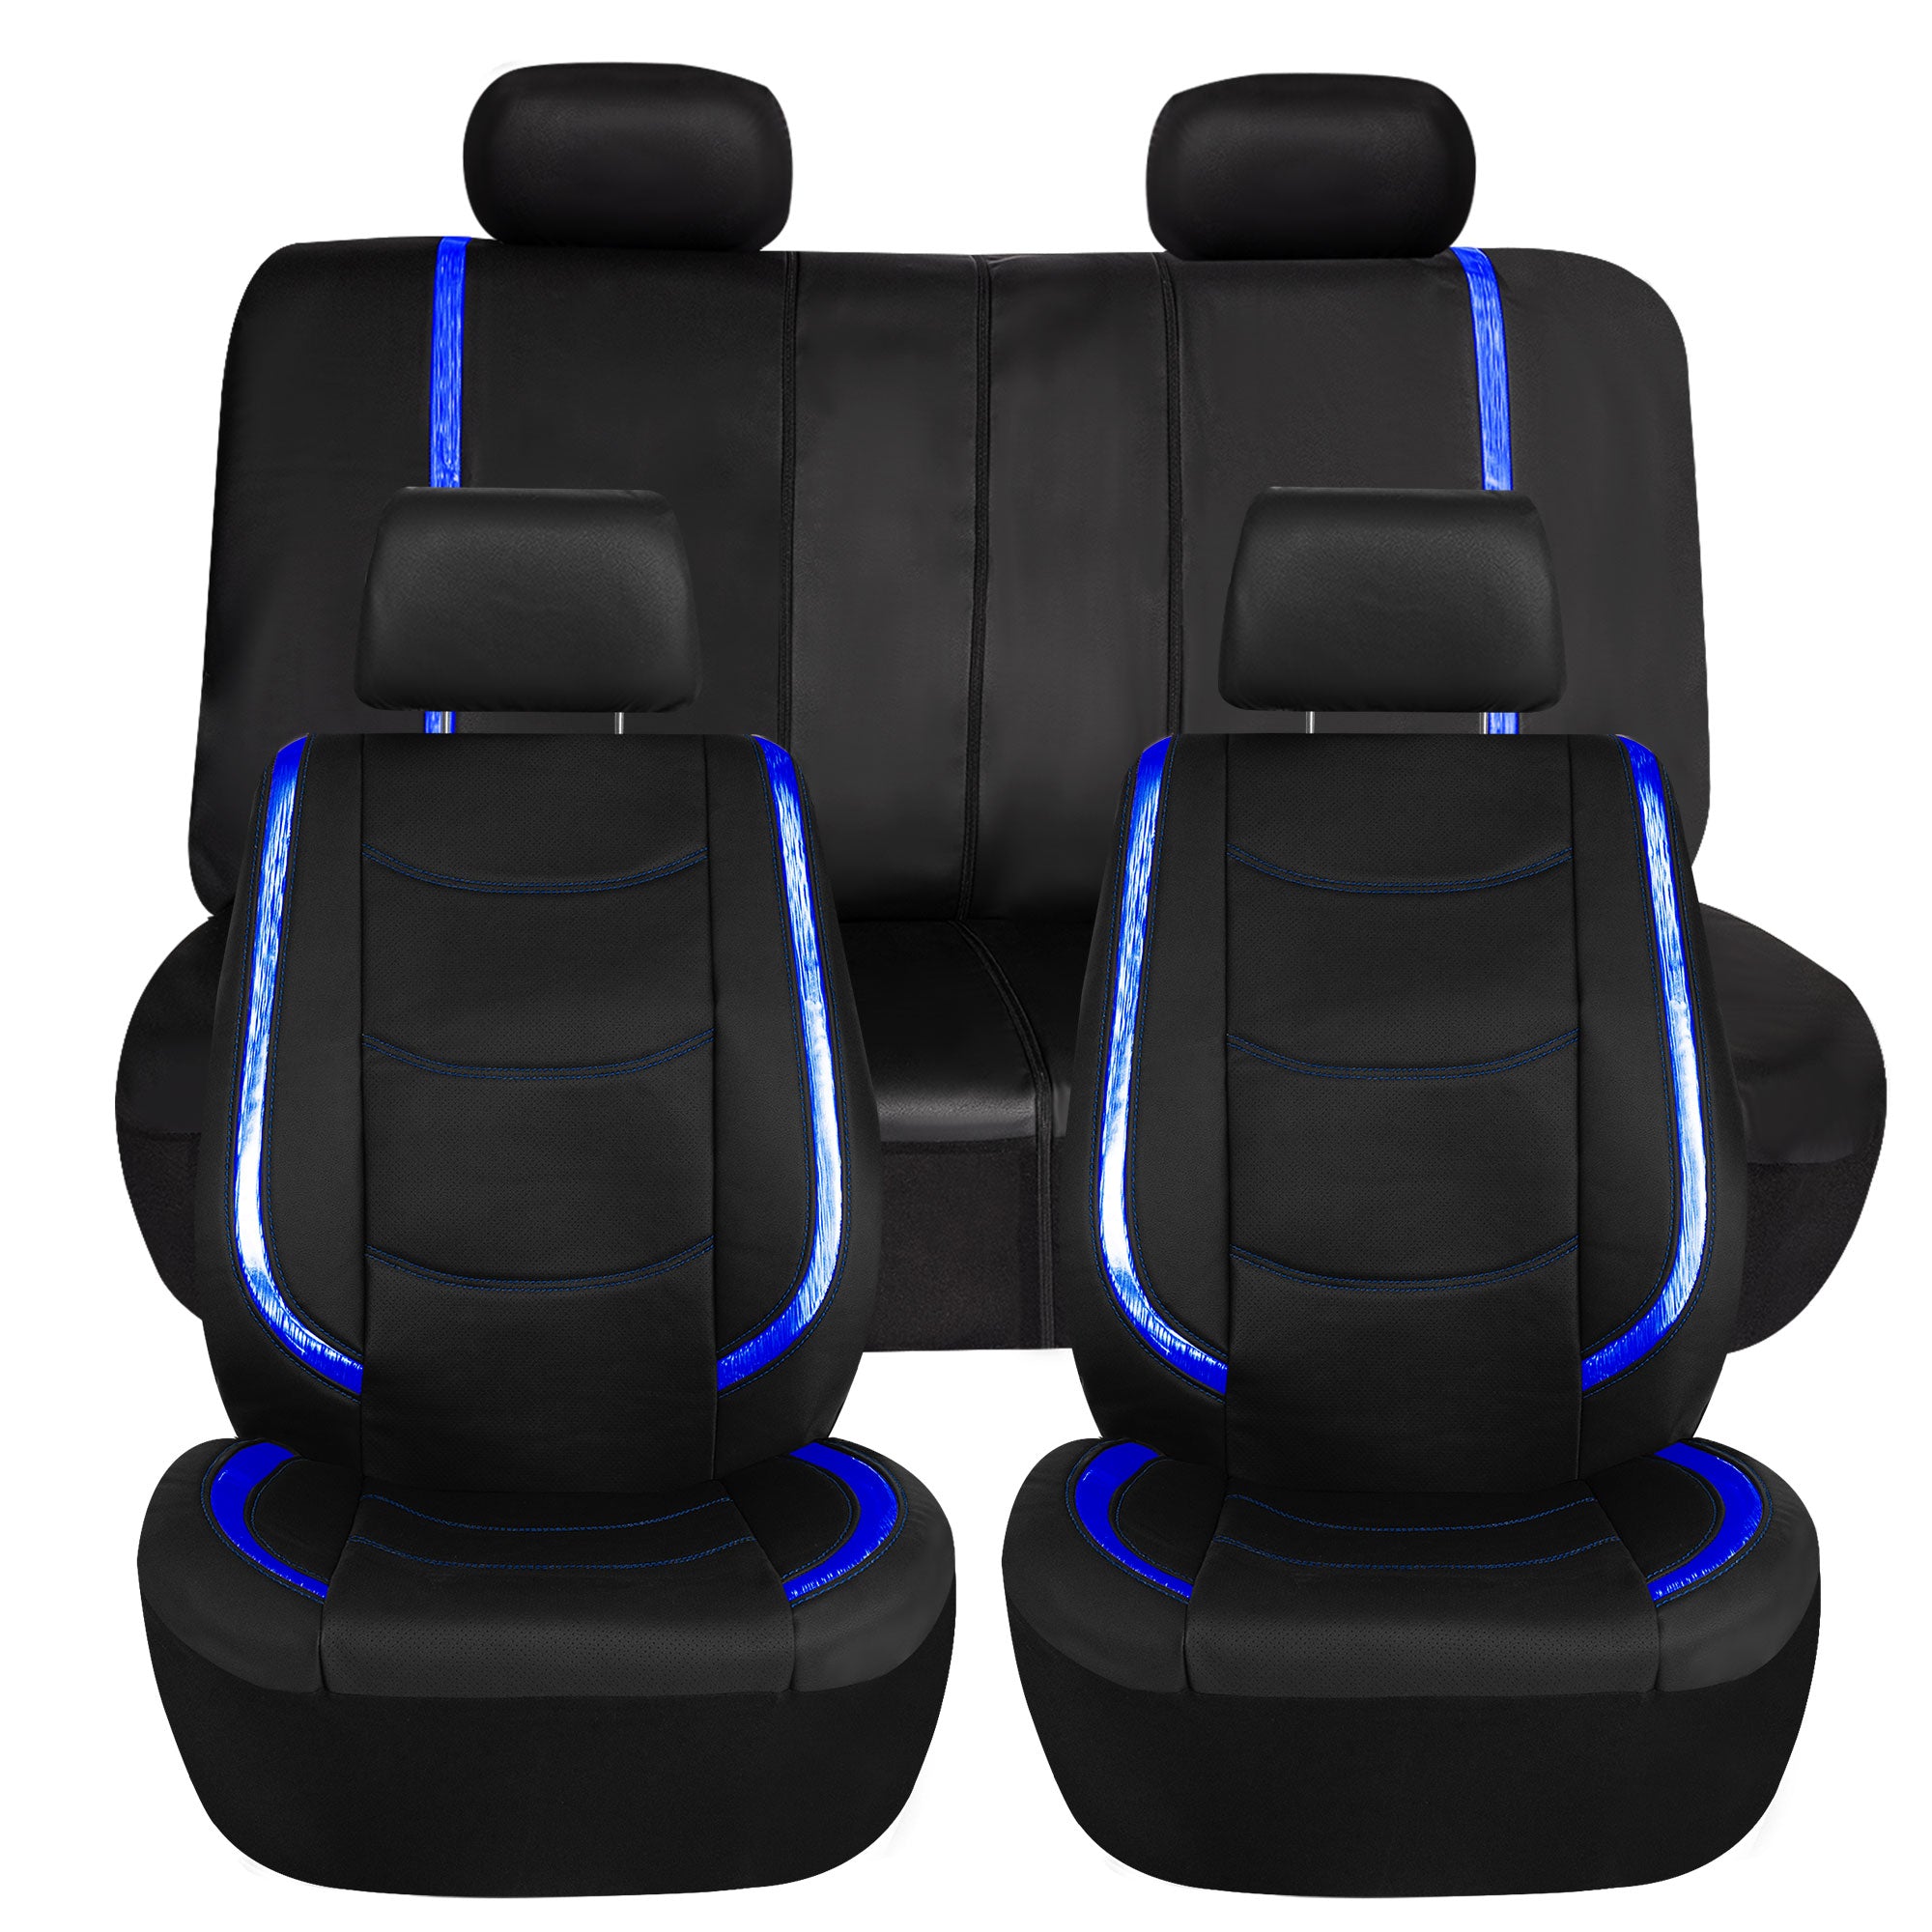 Galaxy13 Metallic Striped Deluxe Leatherette Seat Covers - Full Set Blue